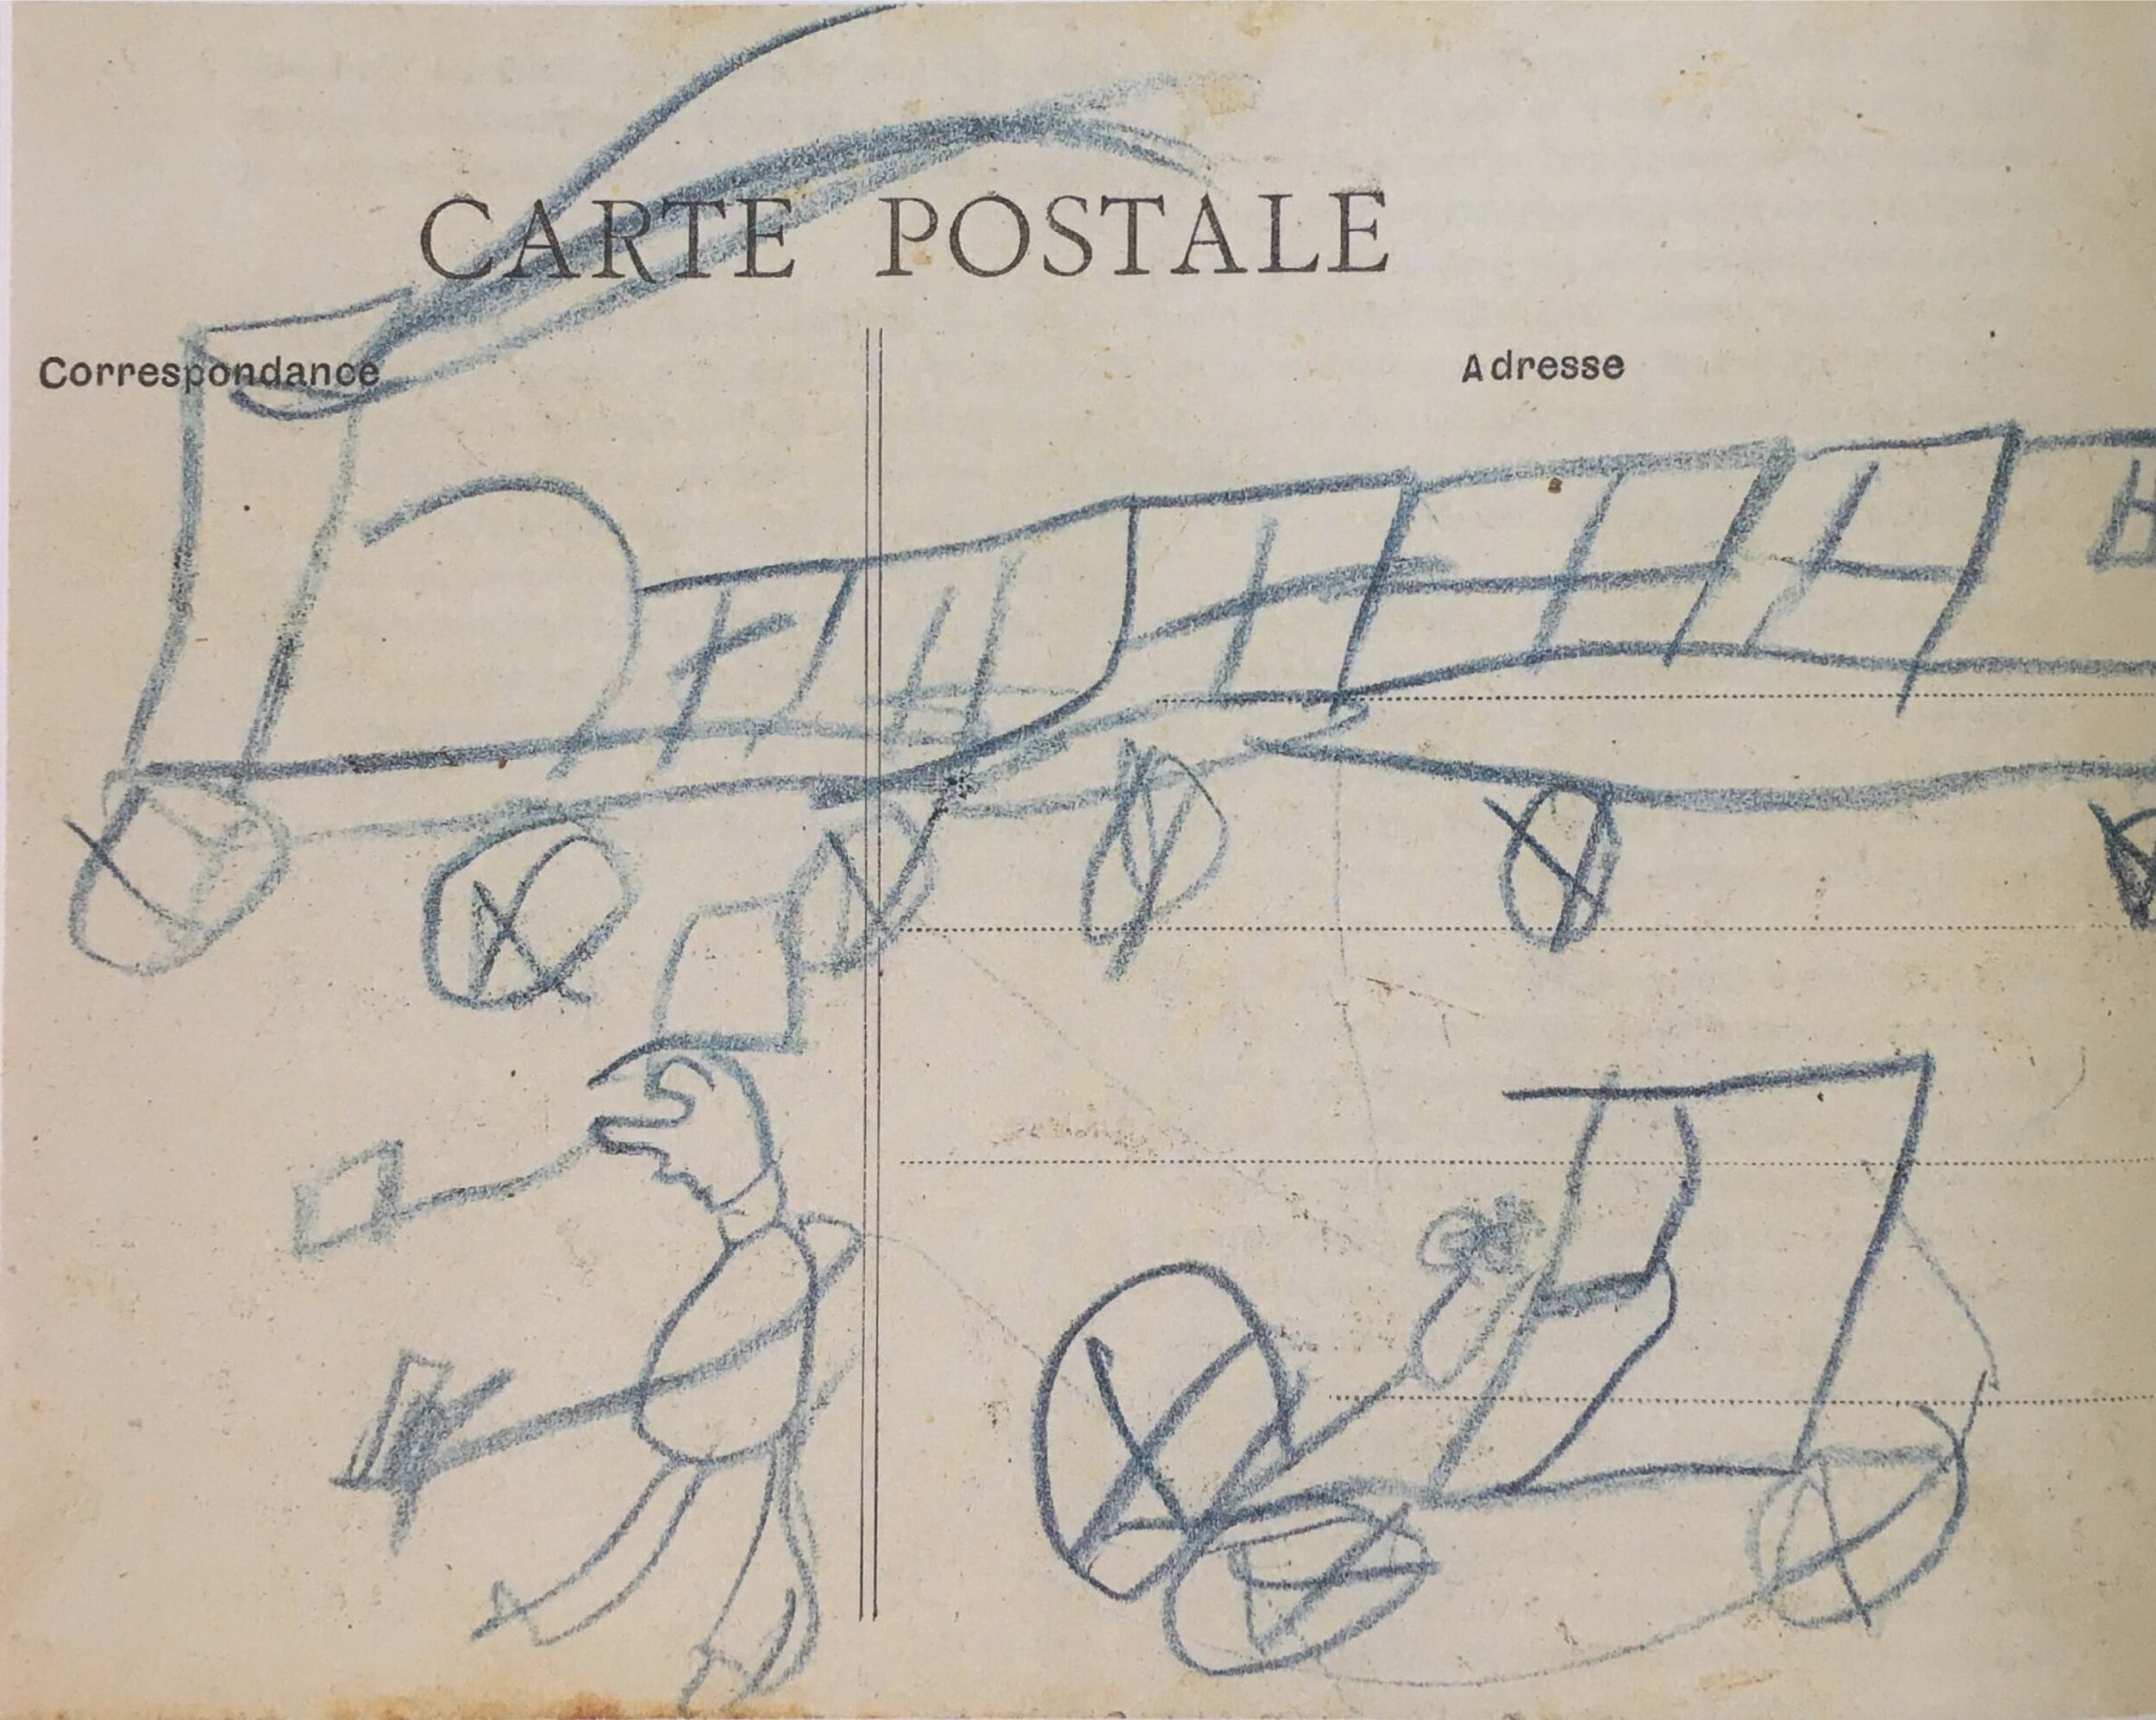  The first-known drawing by the future Herge, circa 1911, when he would be three-four years-old.  Philippe Goddin.  The Art of Herge : Inventor of Tintin 1907/1937.  Editions Moulinsart, 2008 